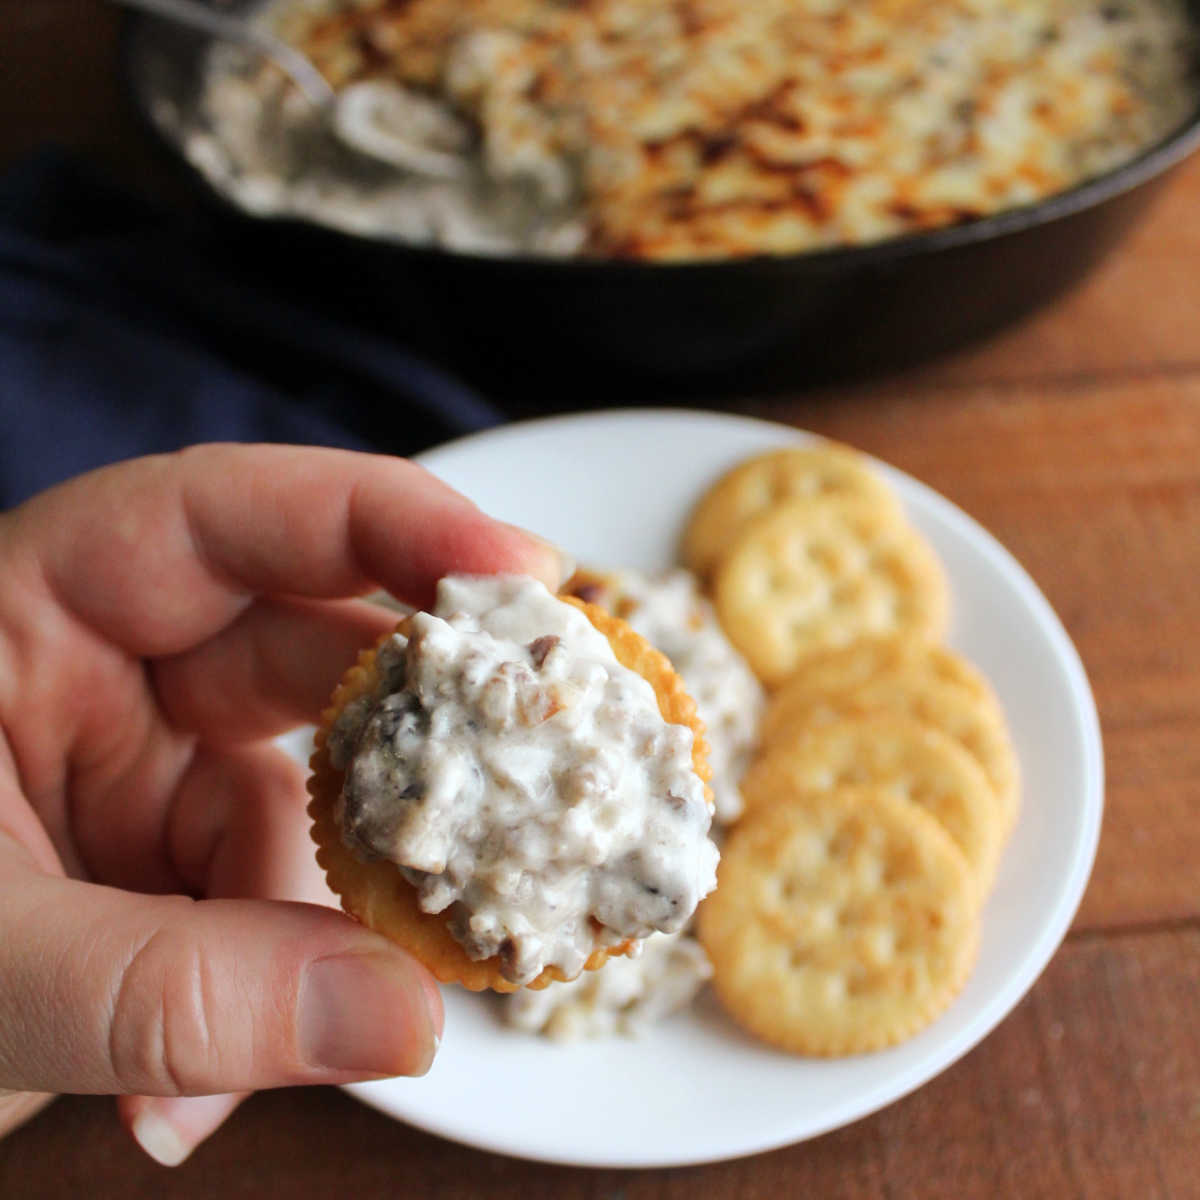 Hand holding cracker topped with creamy stuffed mushroom dip with sausage and cheese.